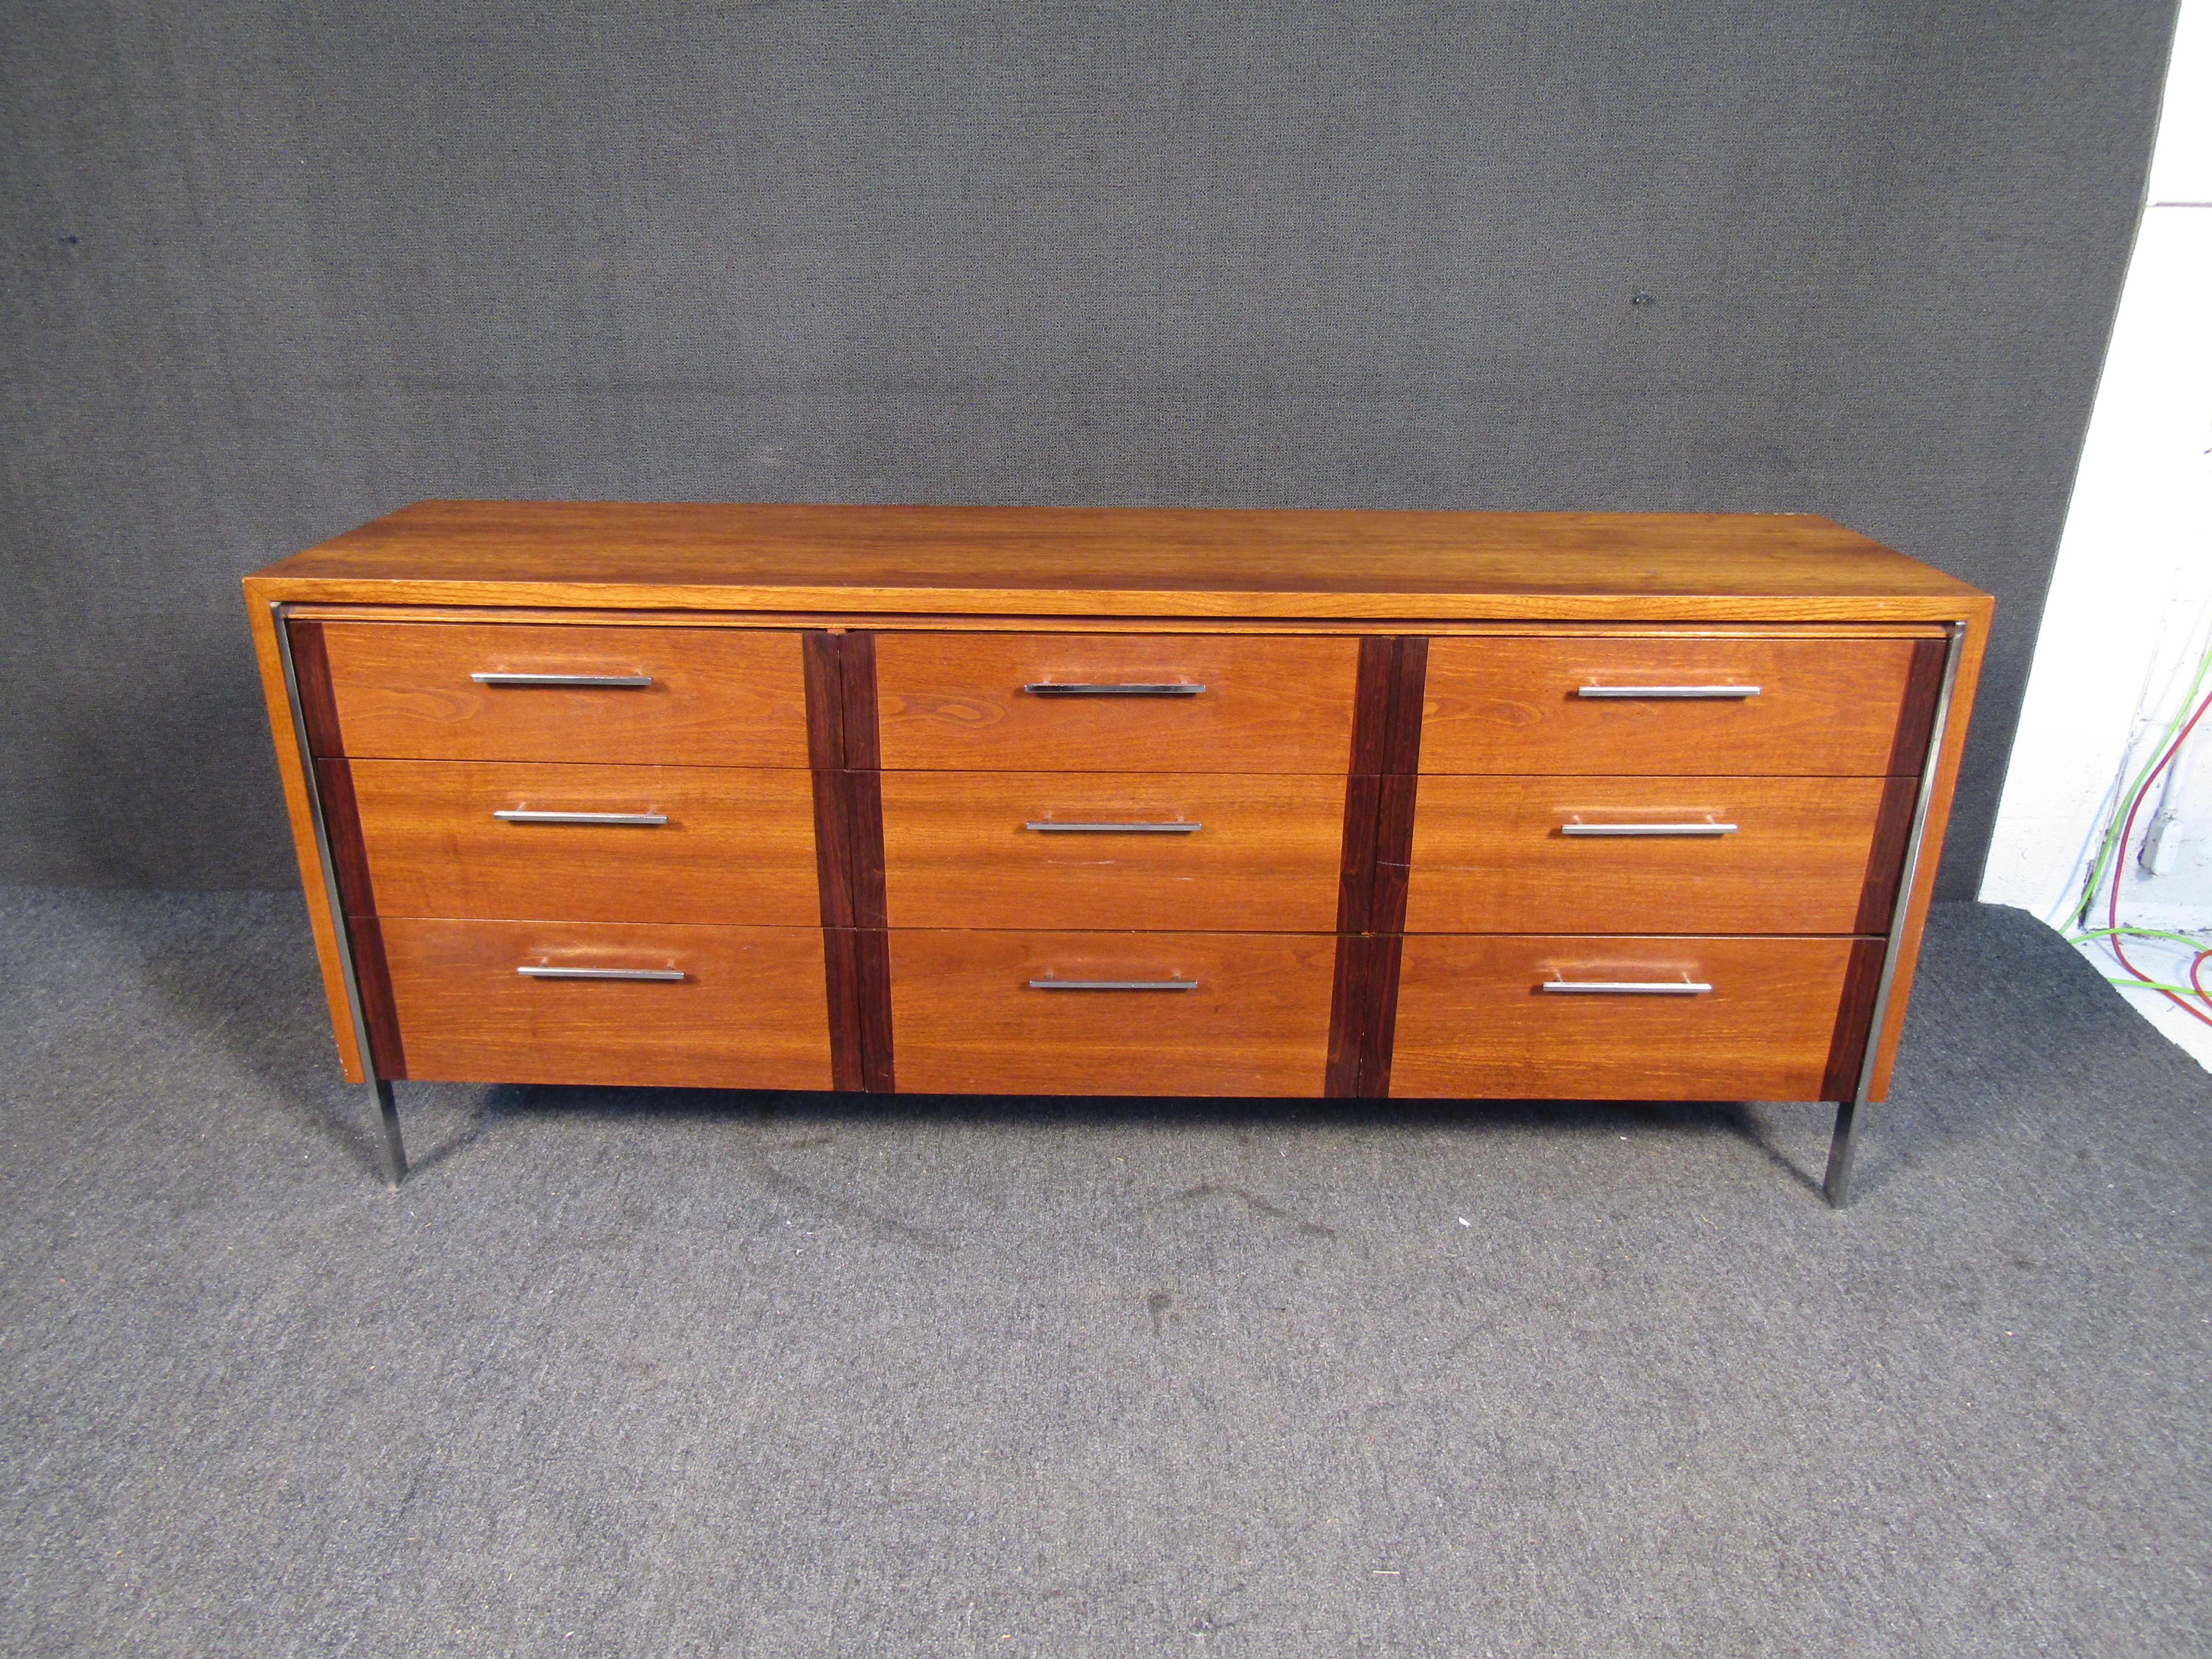 Gorgeous vintage modern credenza by Lane featuring nine drawers total with sleek metal handles. This piece is made with a beautiful mix of rosewood and walnut.
Please confirm item location (NY or NJ).